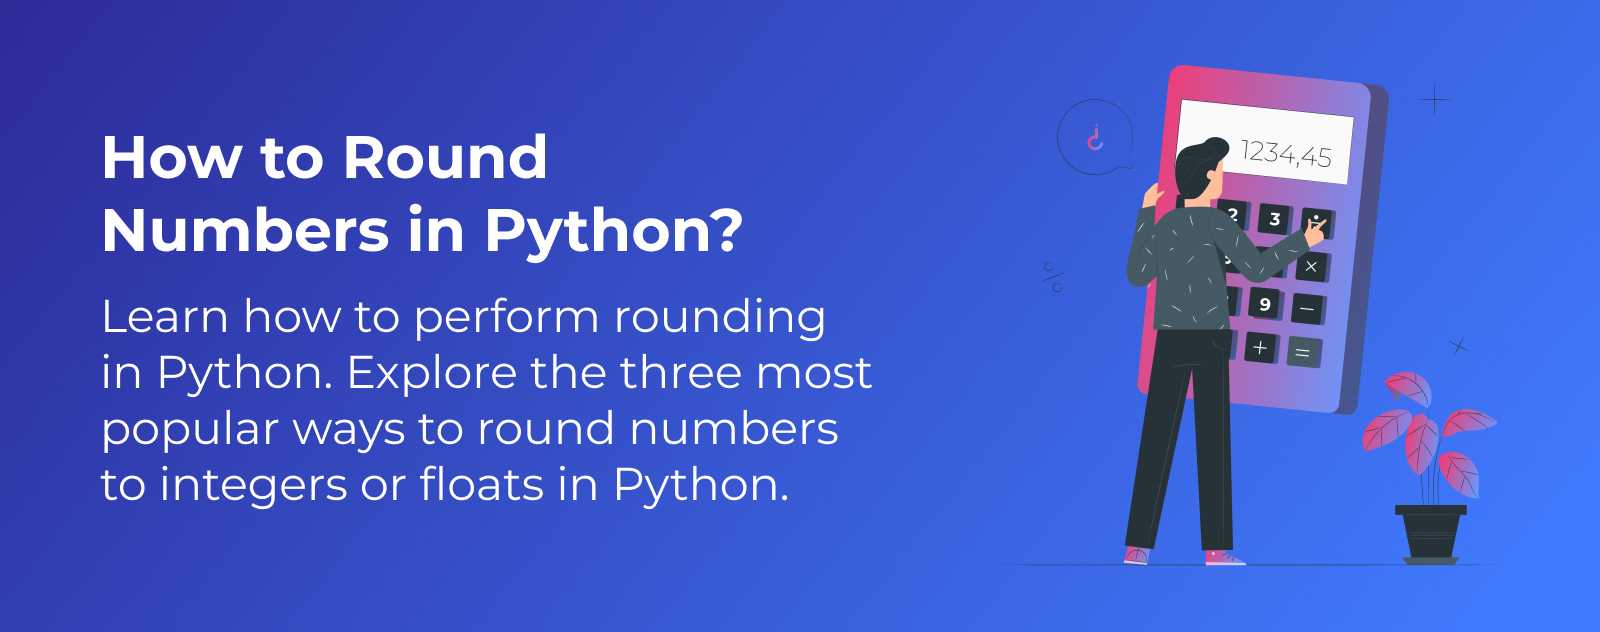 How to Round Numbers in Python?